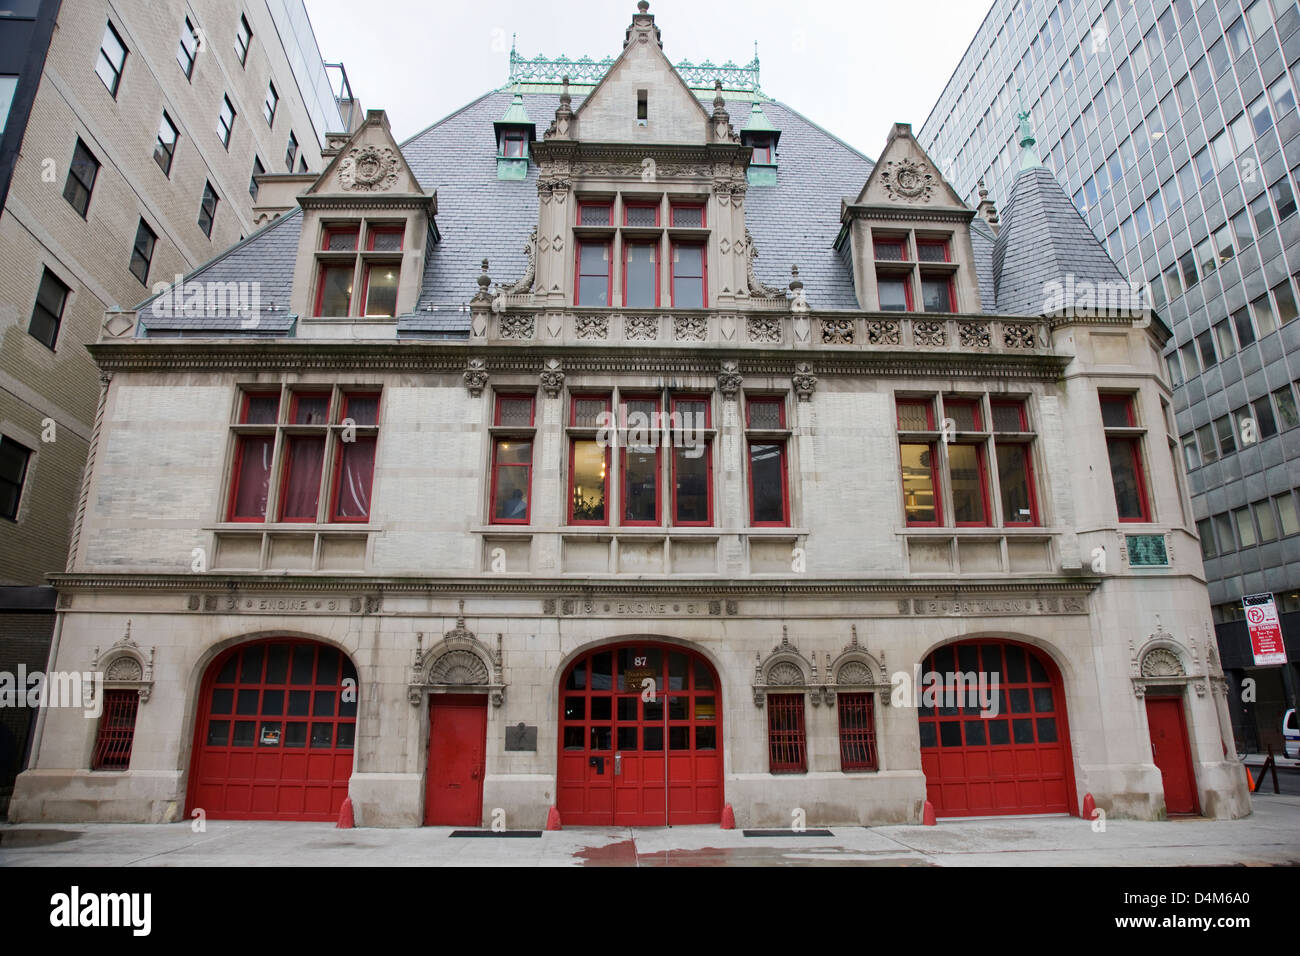 Firehouse, Engine Company 31 is a historic fire station located at 87 Lafayette Street, New York Stock Photo